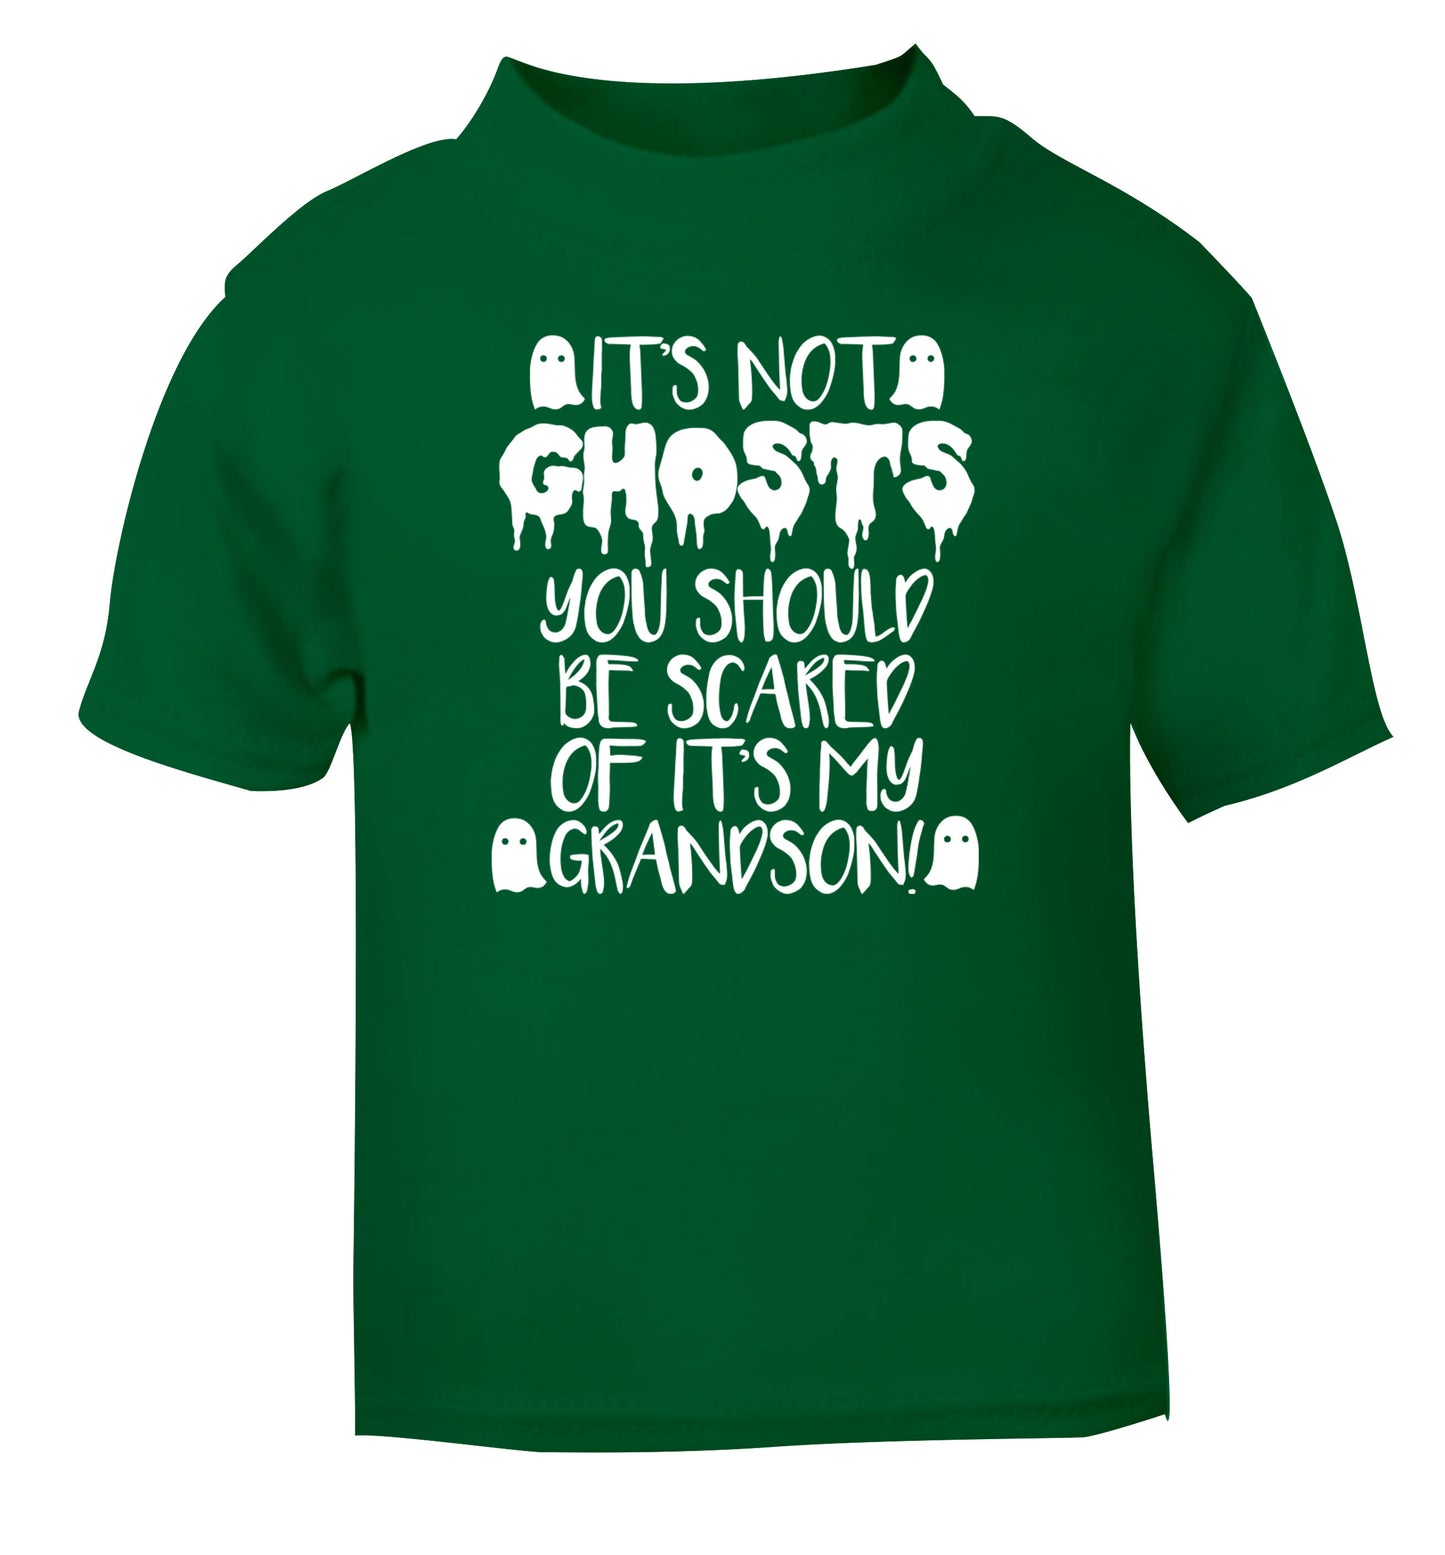 It's not ghosts you should be scared of it's my grandson! green Baby Toddler Tshirt 2 Years